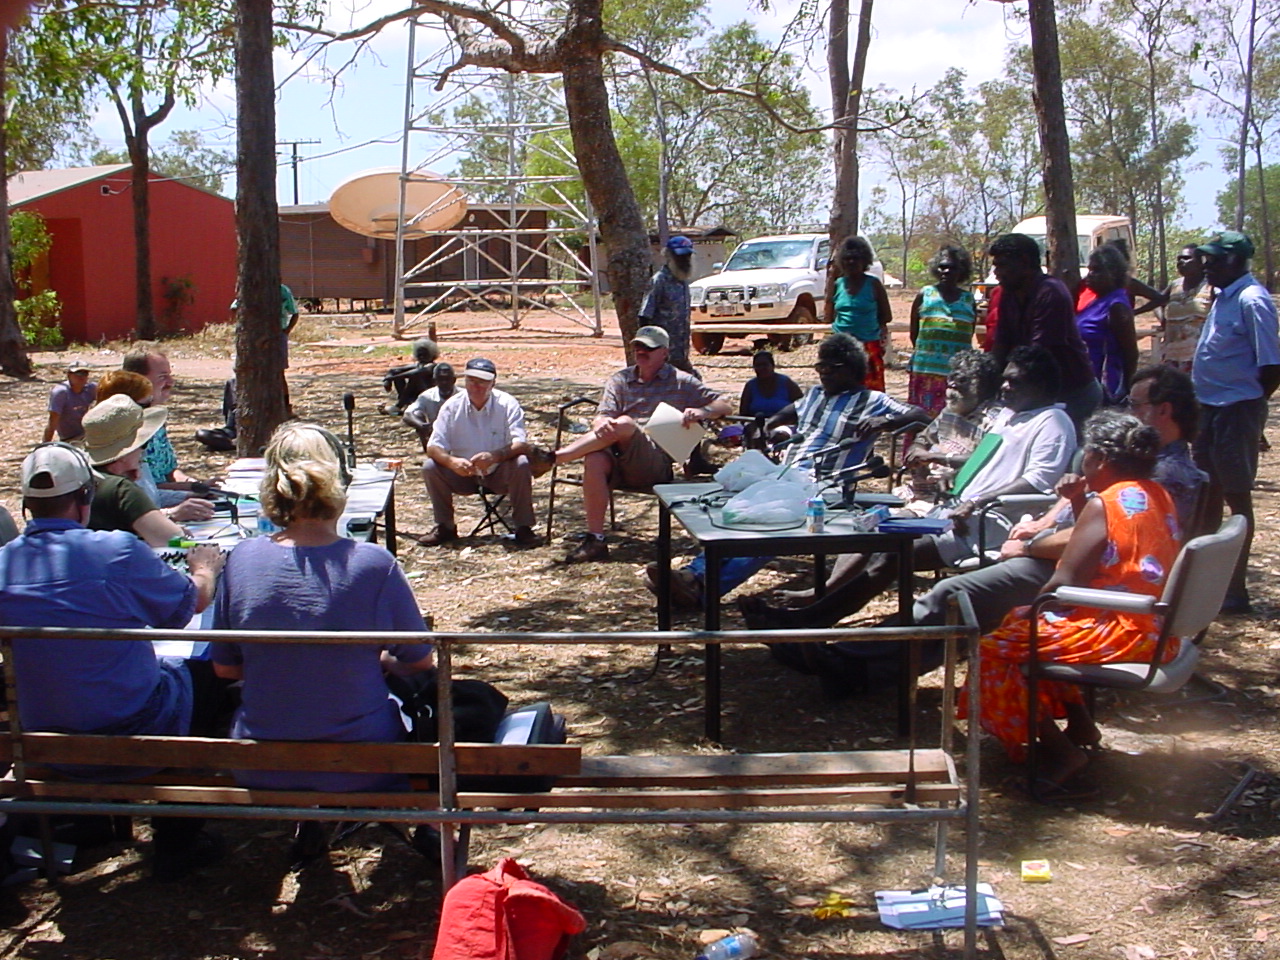 Elcho Island hearing, 11 September 2002. Seated at table on left, closest to farthest: Senators Ursula Stephens, Marise Payne [Acting Chair] and Nigel Scullion. Two Hansard editors seated with backs to camera. Witnesses seated and standing on right include Oscar Datjarrangu, Keith Djinyini, Richard Gandhuwuy, Joe Gumbula, Jeff Leggat [Council Clerk, Milingimbi Council], Roger McIvor [Manager, Marthakal Homelands Resource Centre], Jeffry Mulawa, Mike Netwon [Council Clerk, Galiwin'ku Council], Terry Yumbilil and Charles Yunupingu.